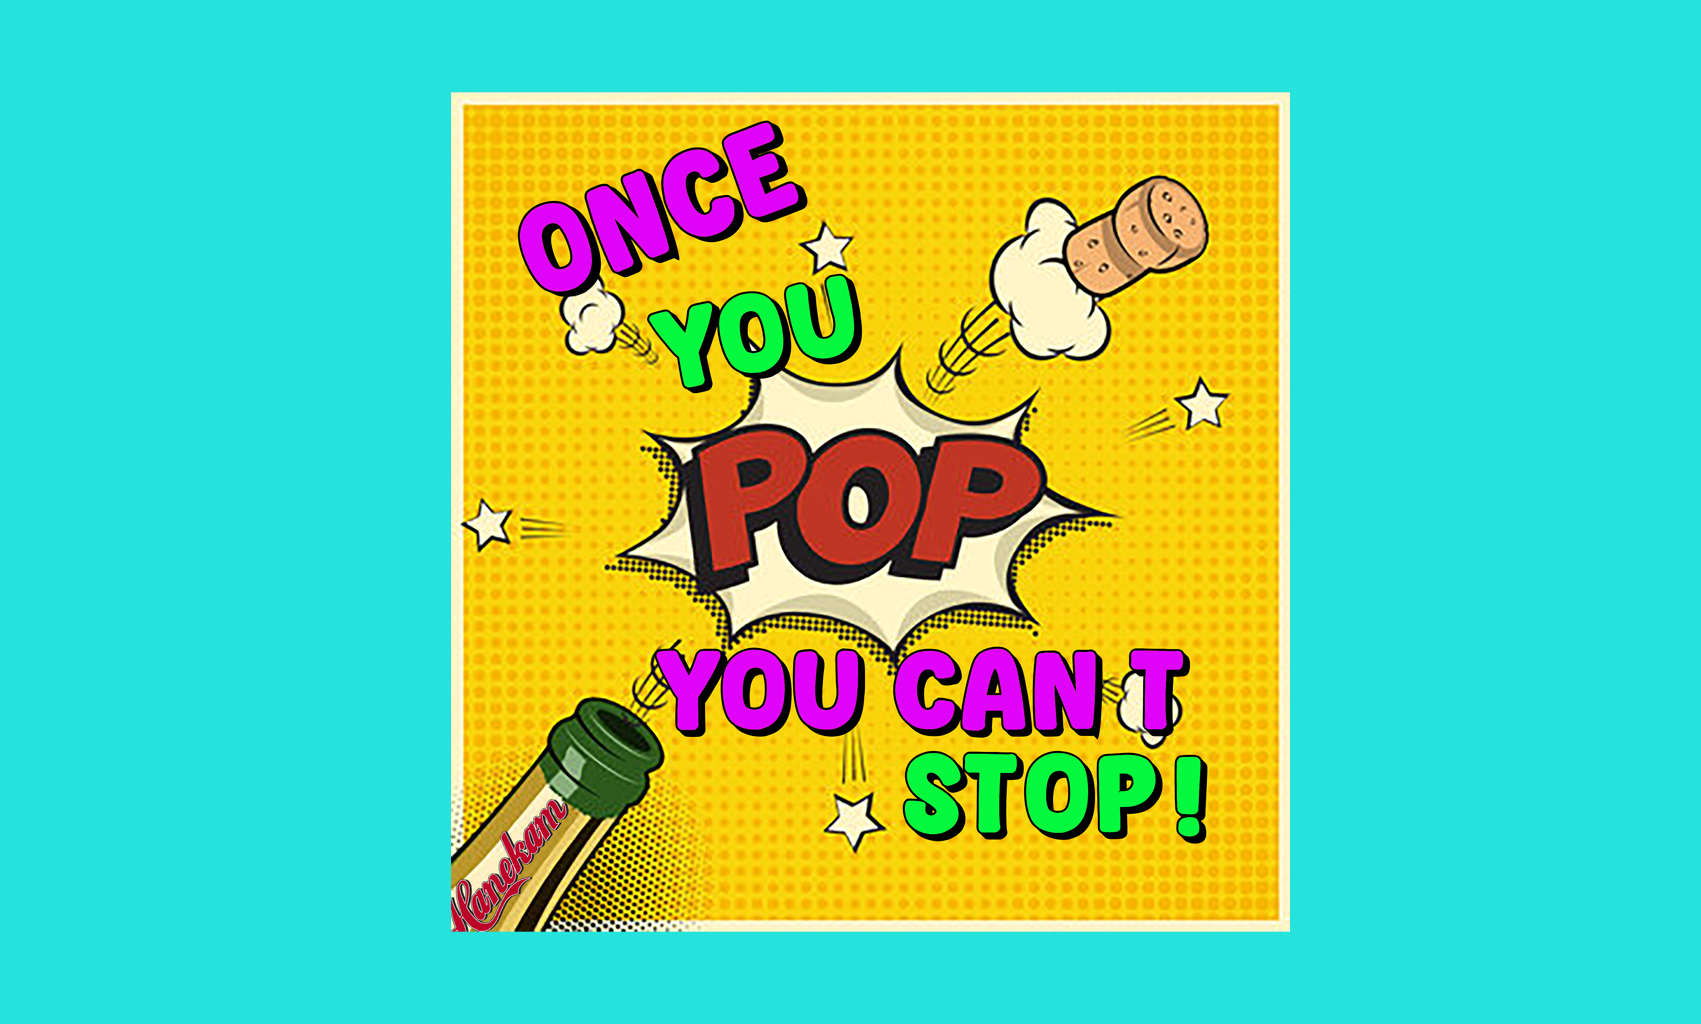 Once you pop, you can't stop!